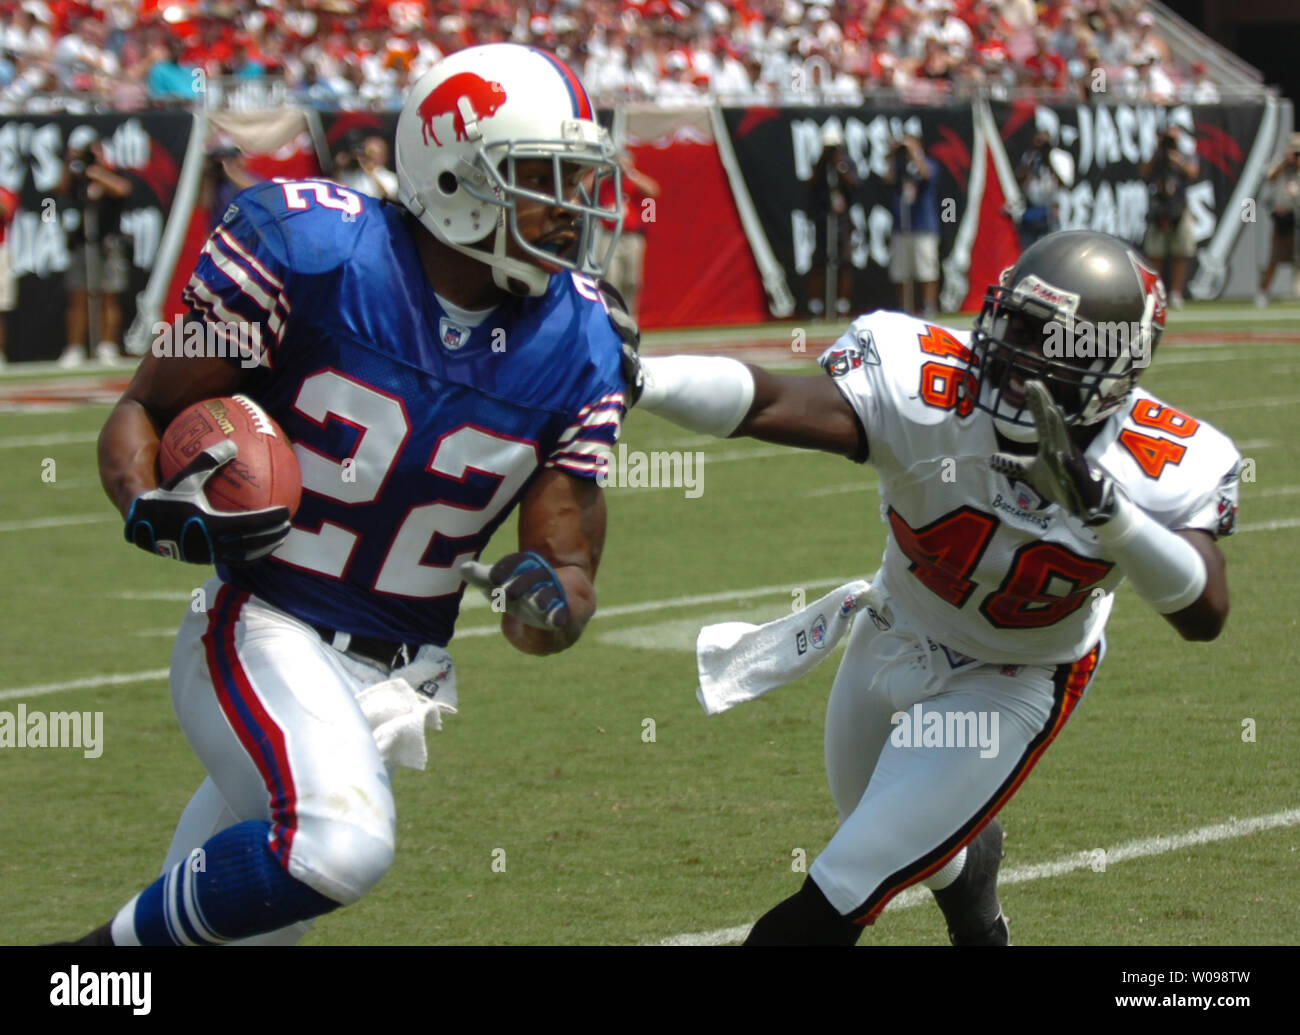 Buffalo Bills' Nate Clements (22) breaks a tackle by Tampa Bay Buccaneers' Blue Adams (46) during first-quarter action at Raymond James Stadium Sept. 18, 2005 in Tampa, Fl. The Buccaneers beat the Bills 19-3 and are now 2-0.  (UPI Photo/Cathy Kapulka) Stock Photo